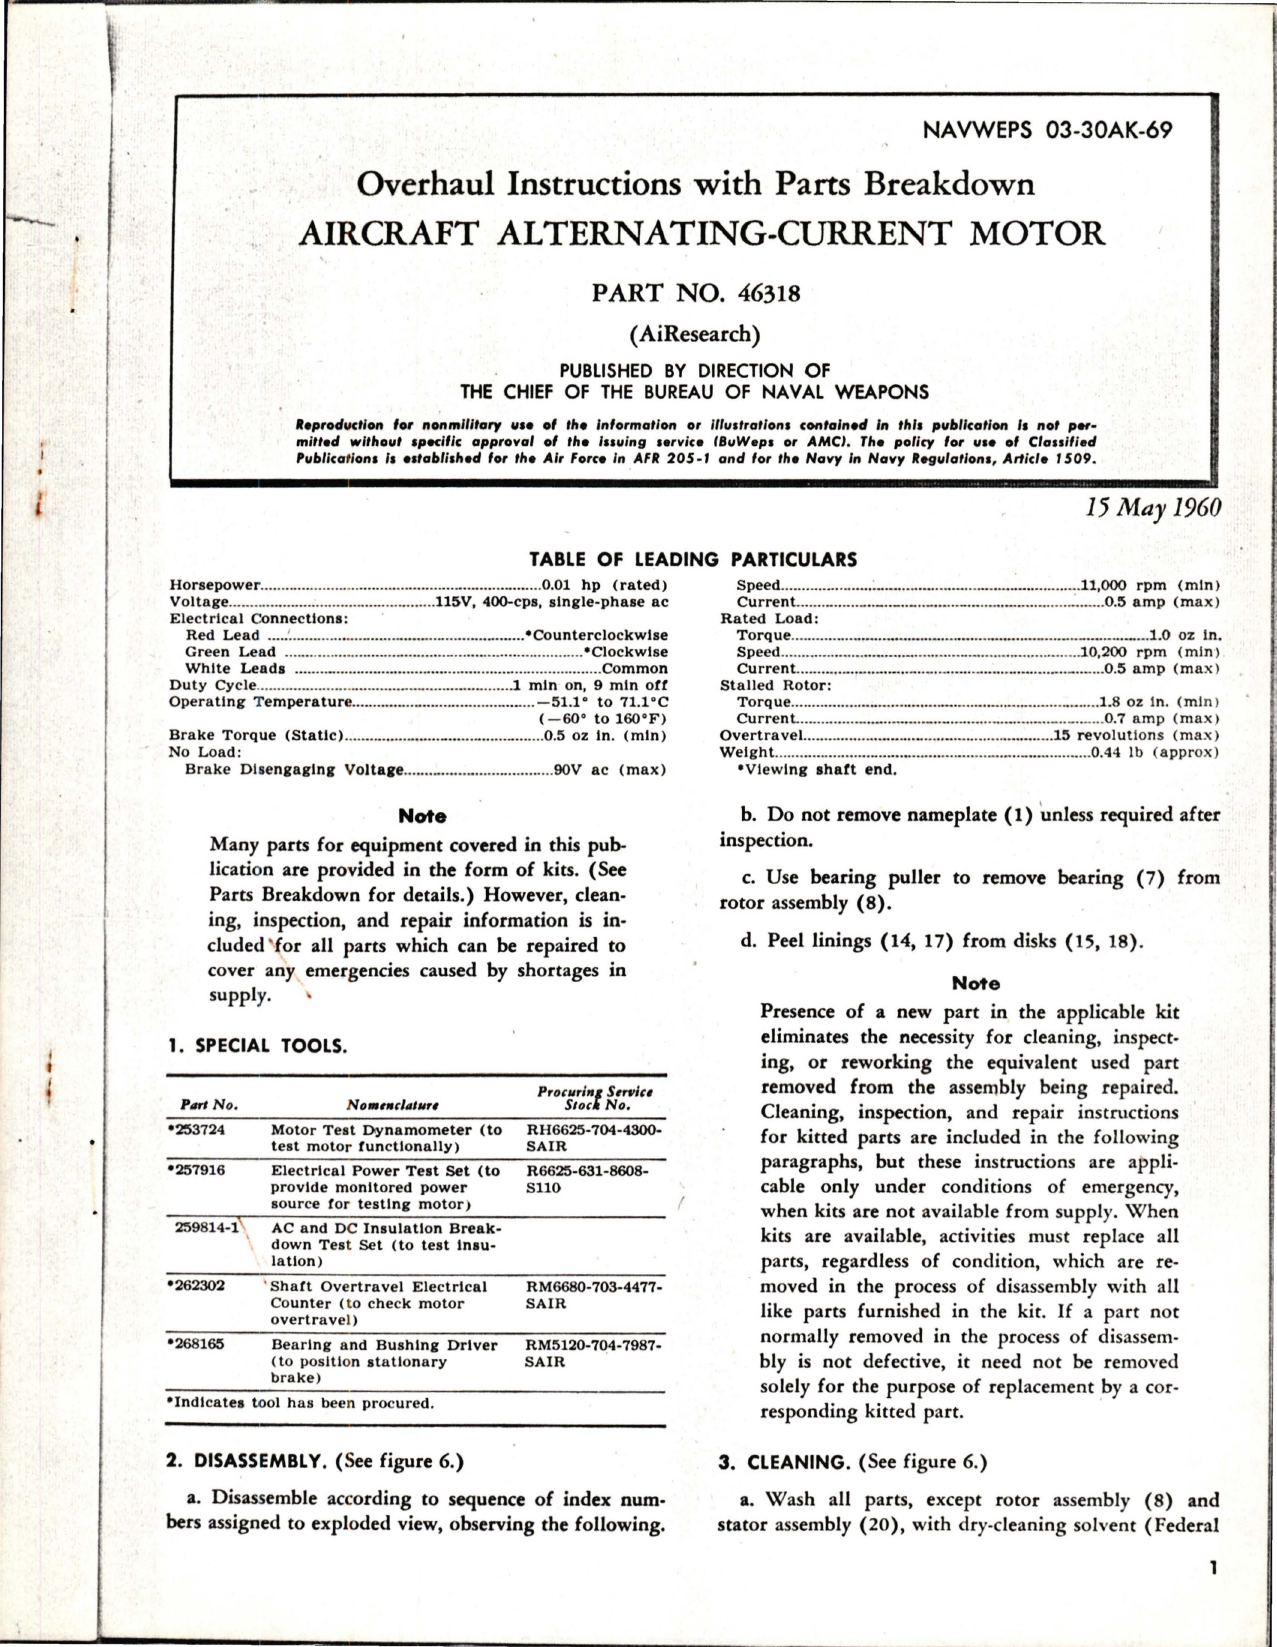 Sample page 1 from AirCorps Library document: Overhaul Instructions with Parts Breakdown for Alternating-Current Motor - Part 46318